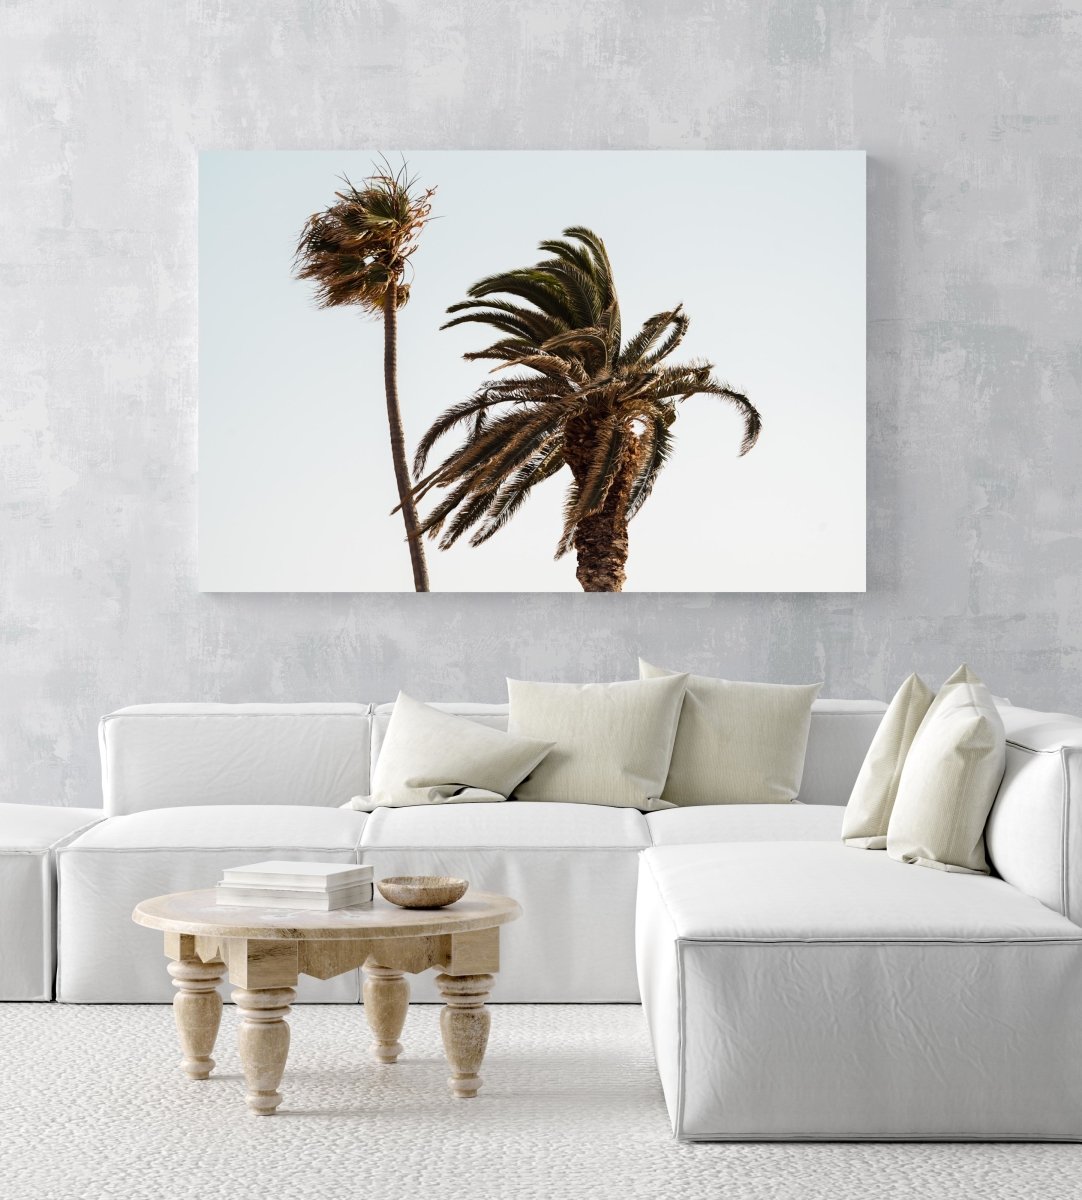 Two palm trees blowing in the wind at Ponta da Piedade in an acrylic/perspex frame